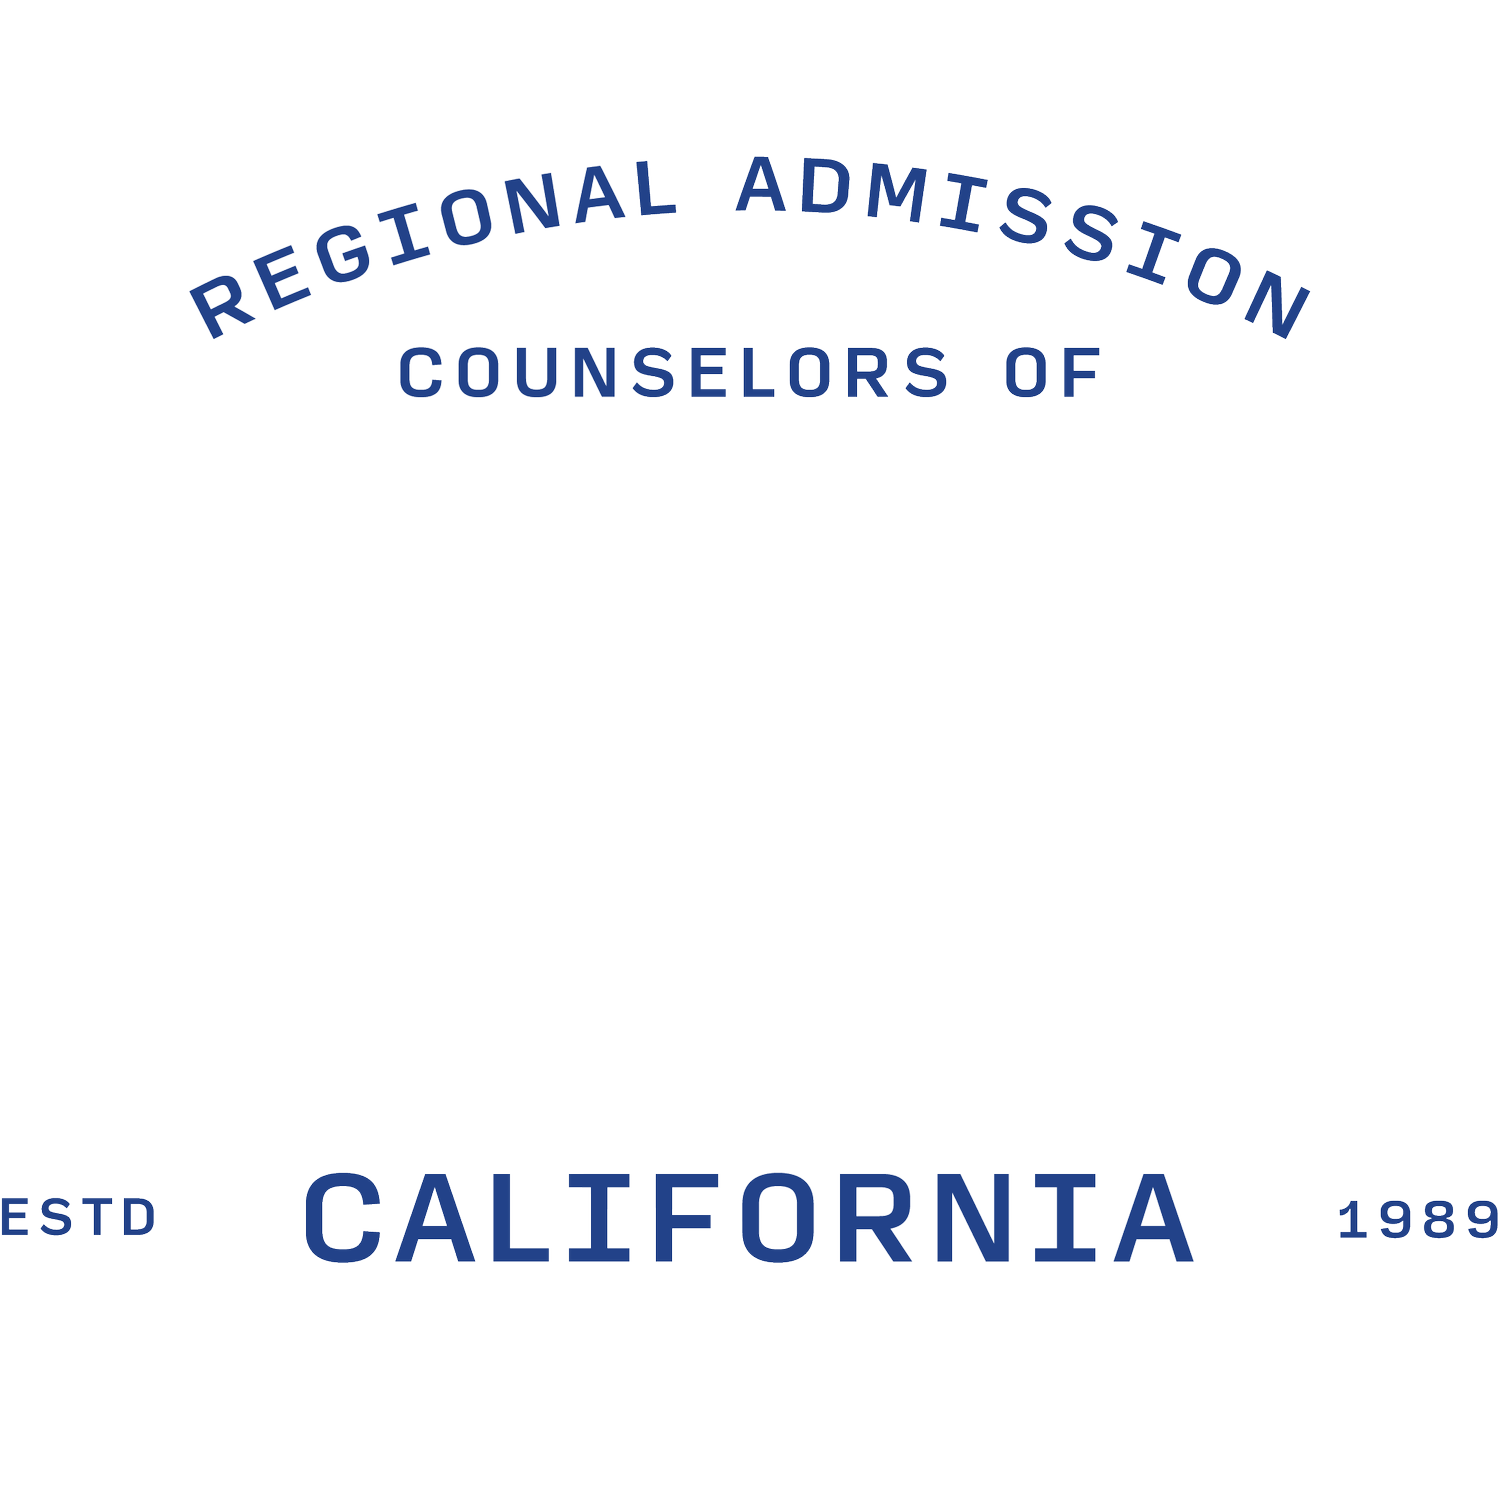 Regional Admissions Counselors of California